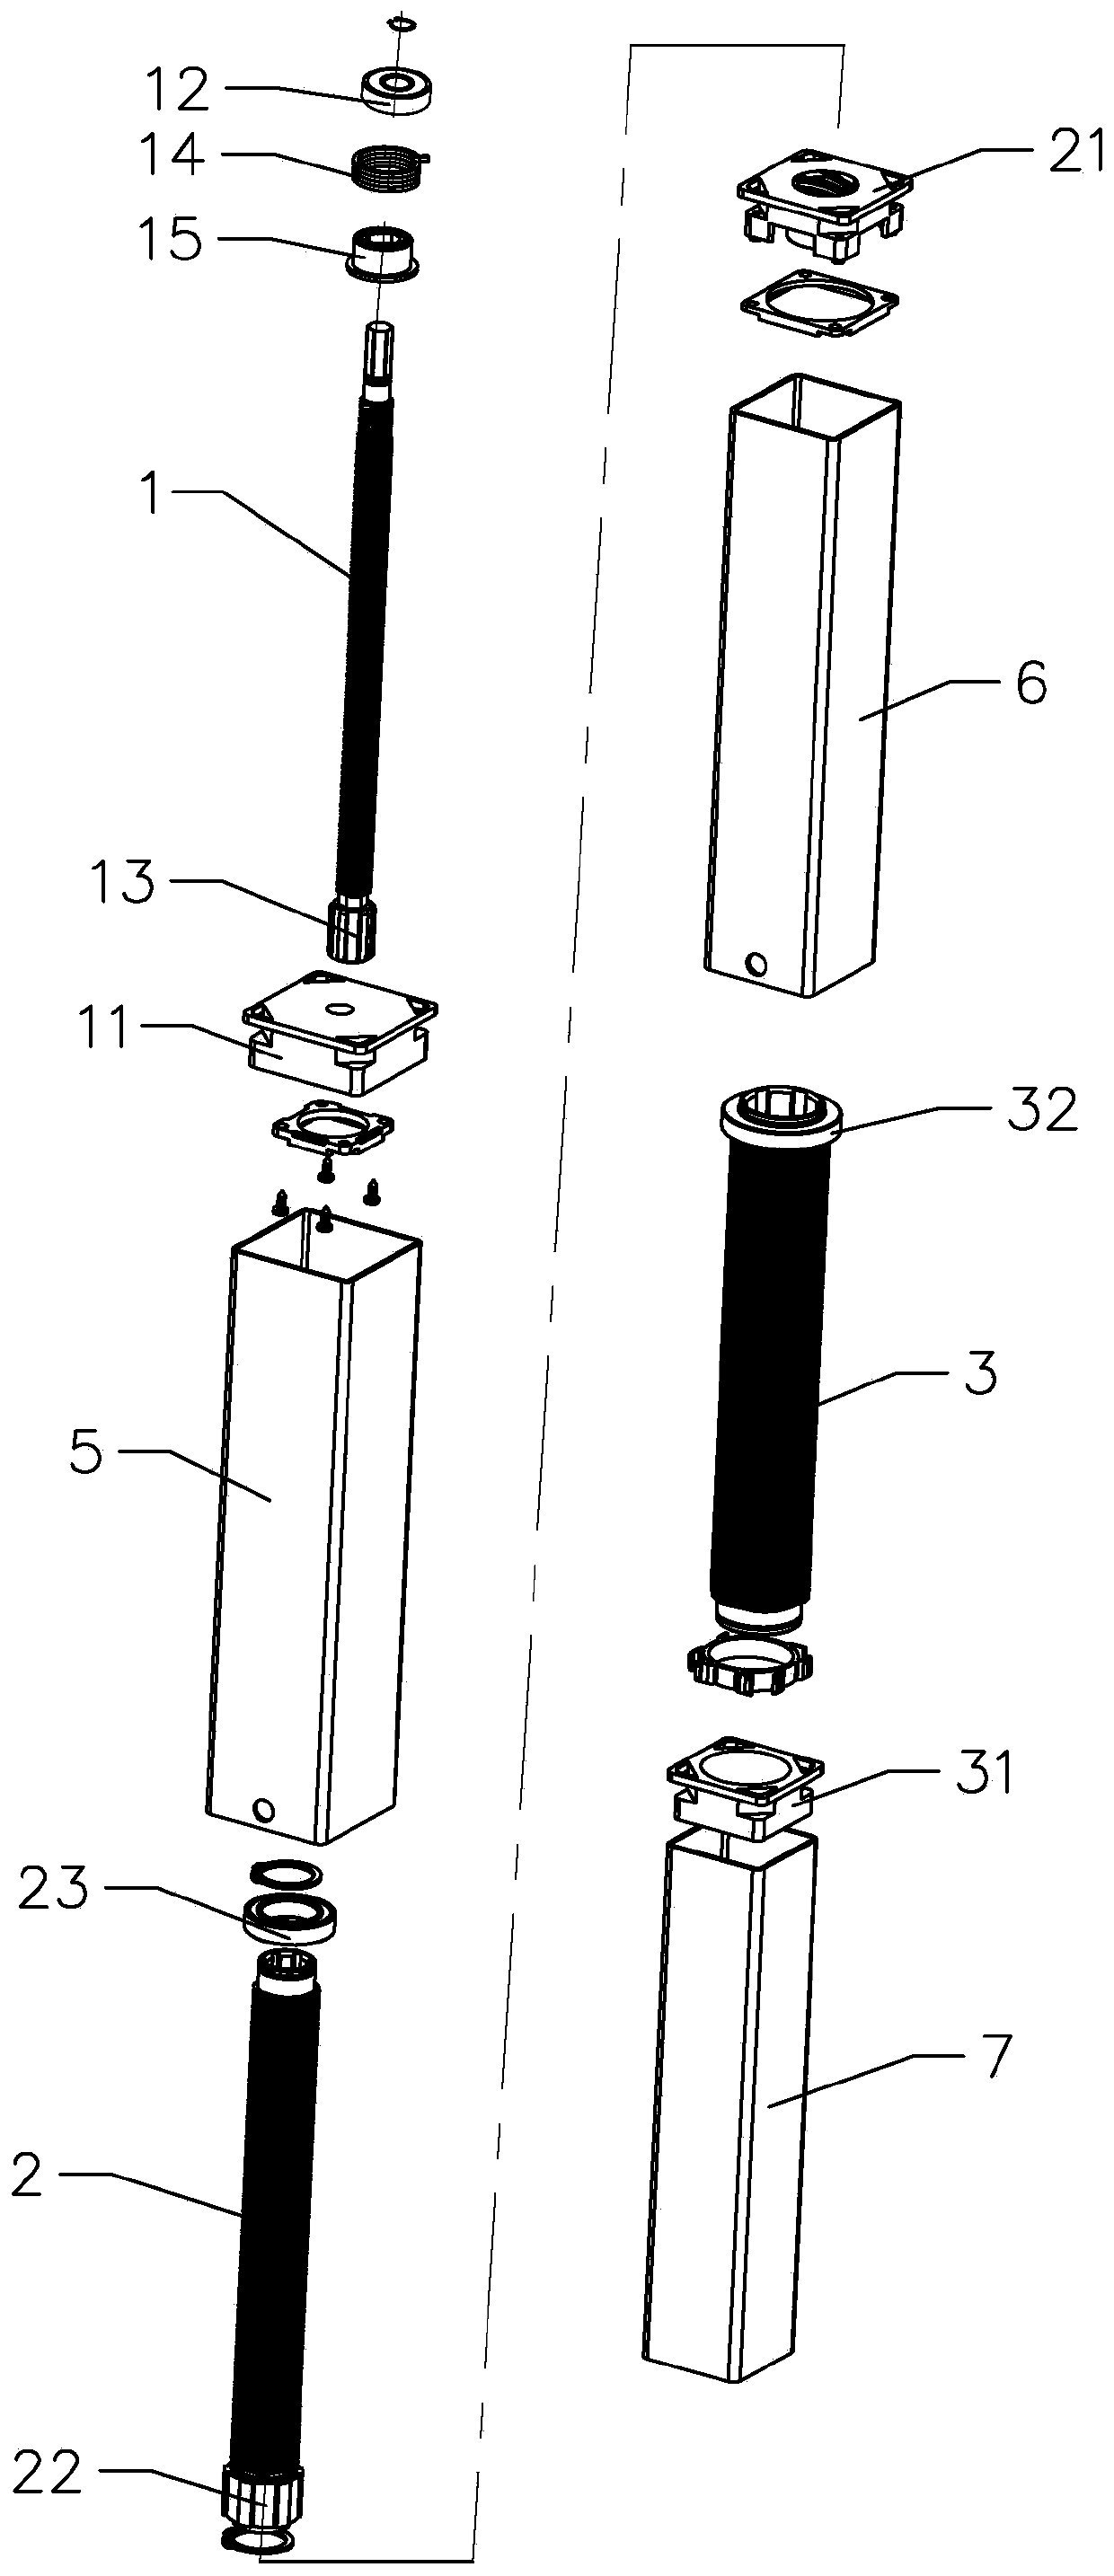 Transmission assembly and lifting vertical column